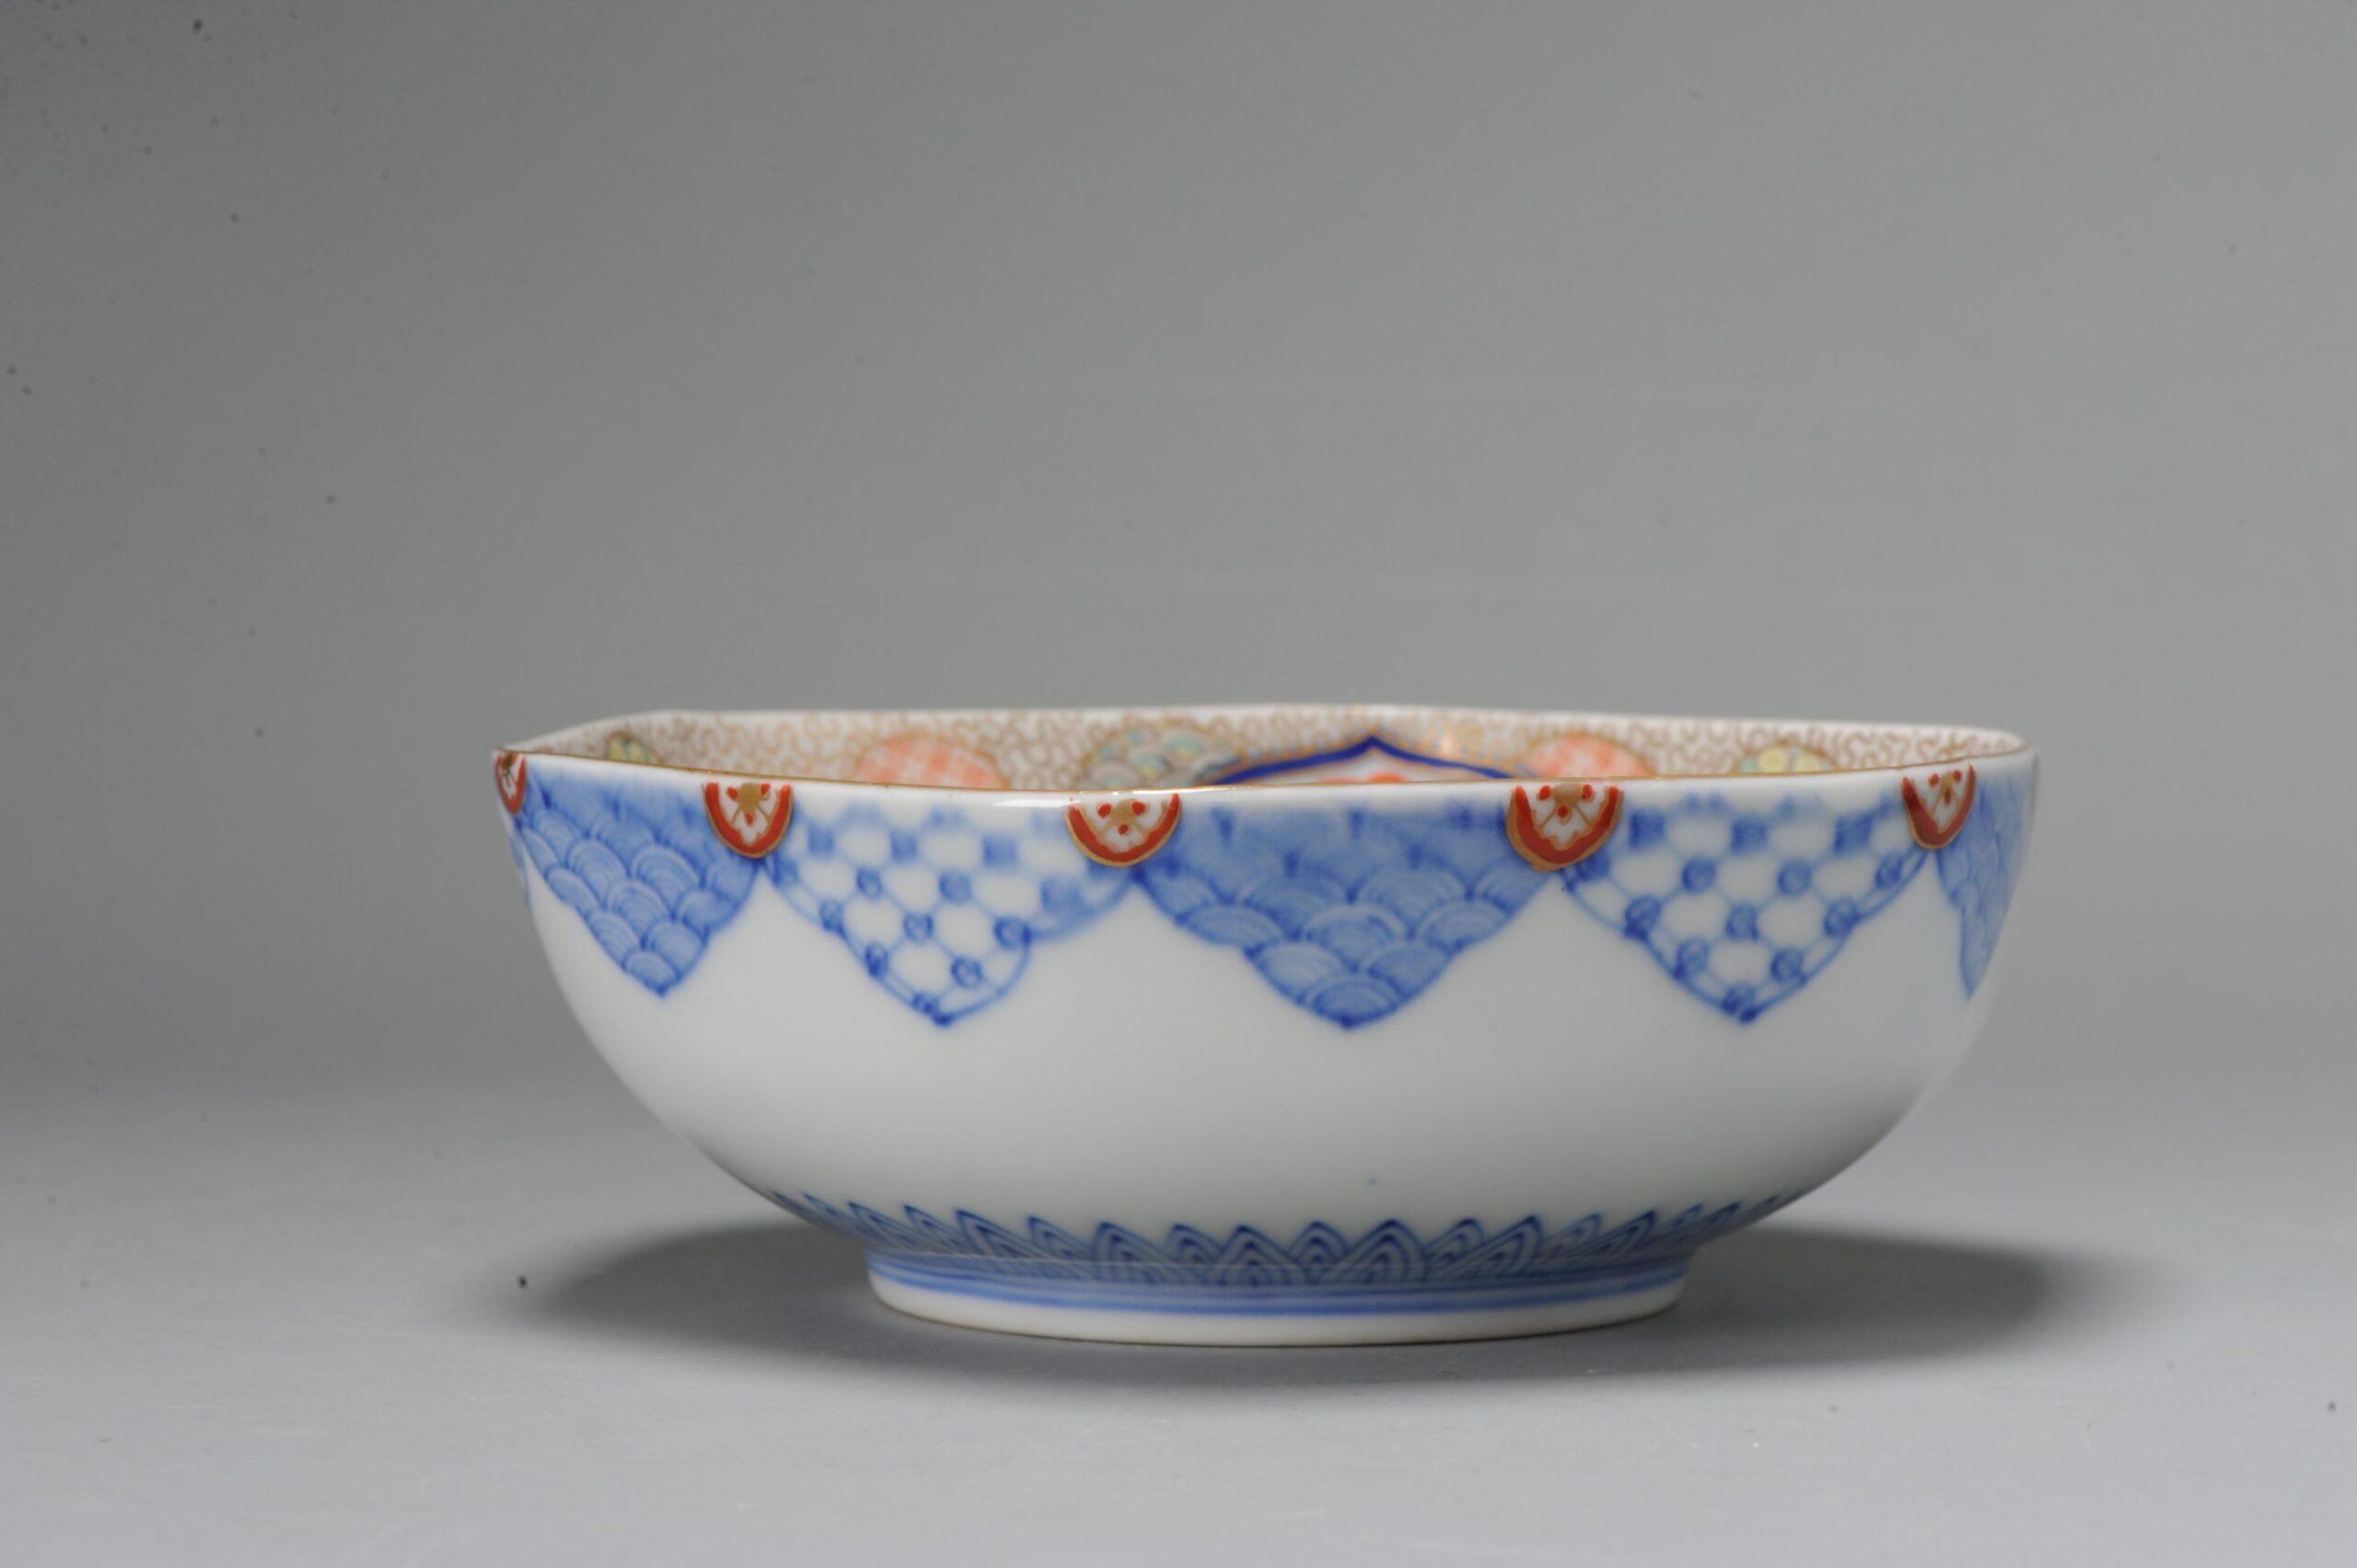 Porcelain decorated in underglaze cobalt blue and overglaze red.

Meiji , c. 19th c, Bowl.

Additional information:
Material: Porcelain & Pottery
Type: Tea/Coffee Drinking: Bowls, Cups & Teapots
Period: 19th century
